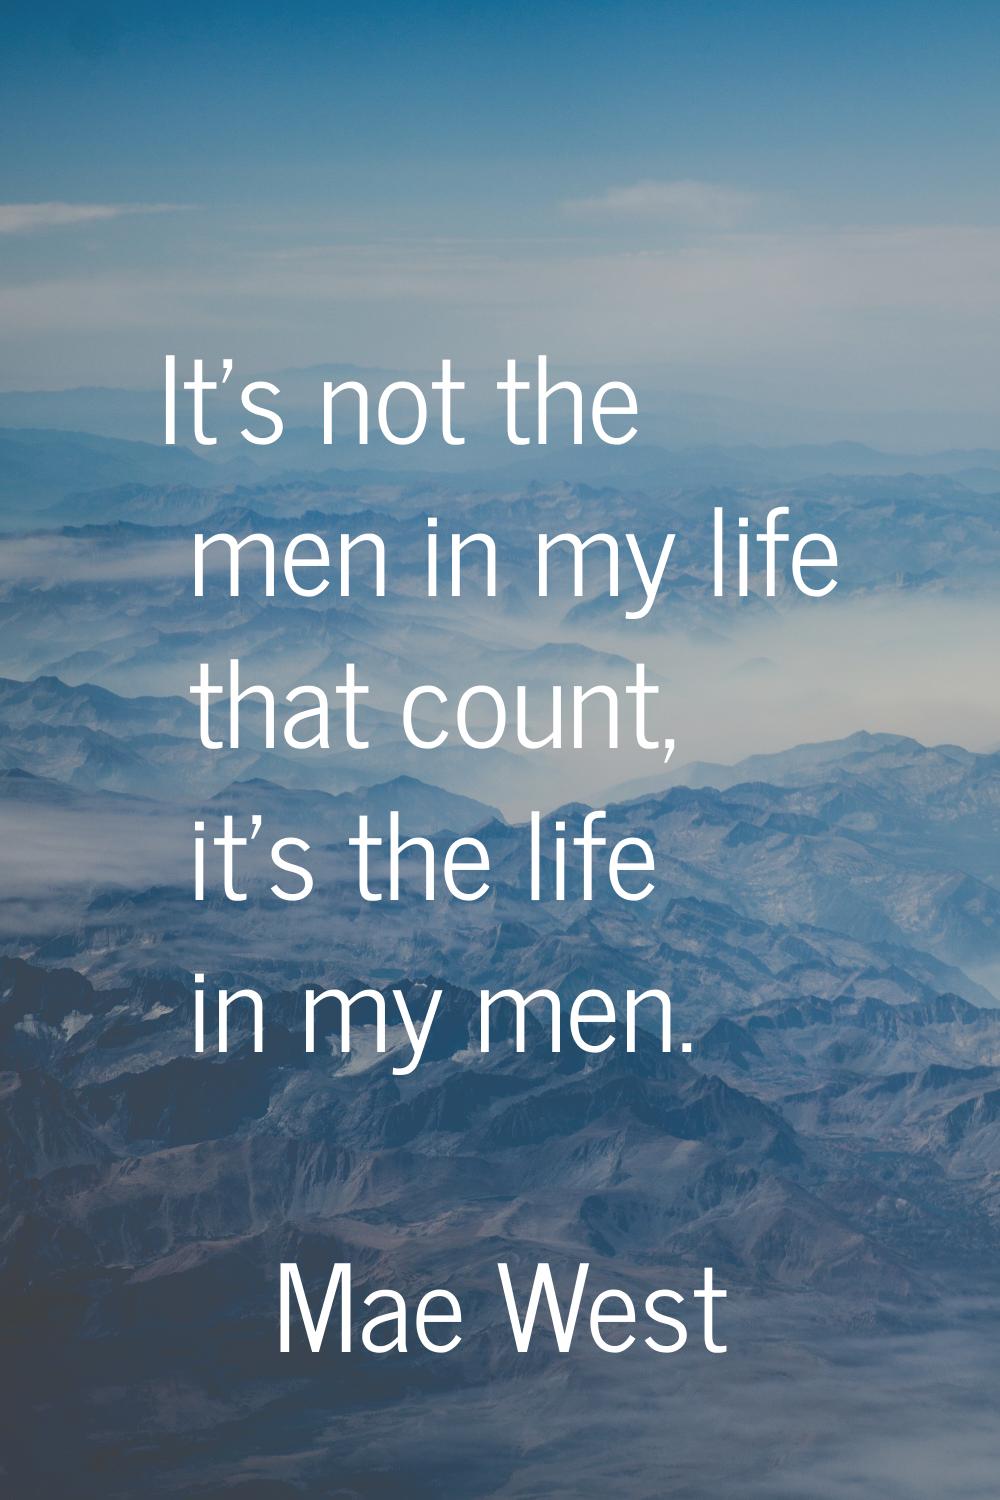 It's not the men in my life that count, it's the life in my men.